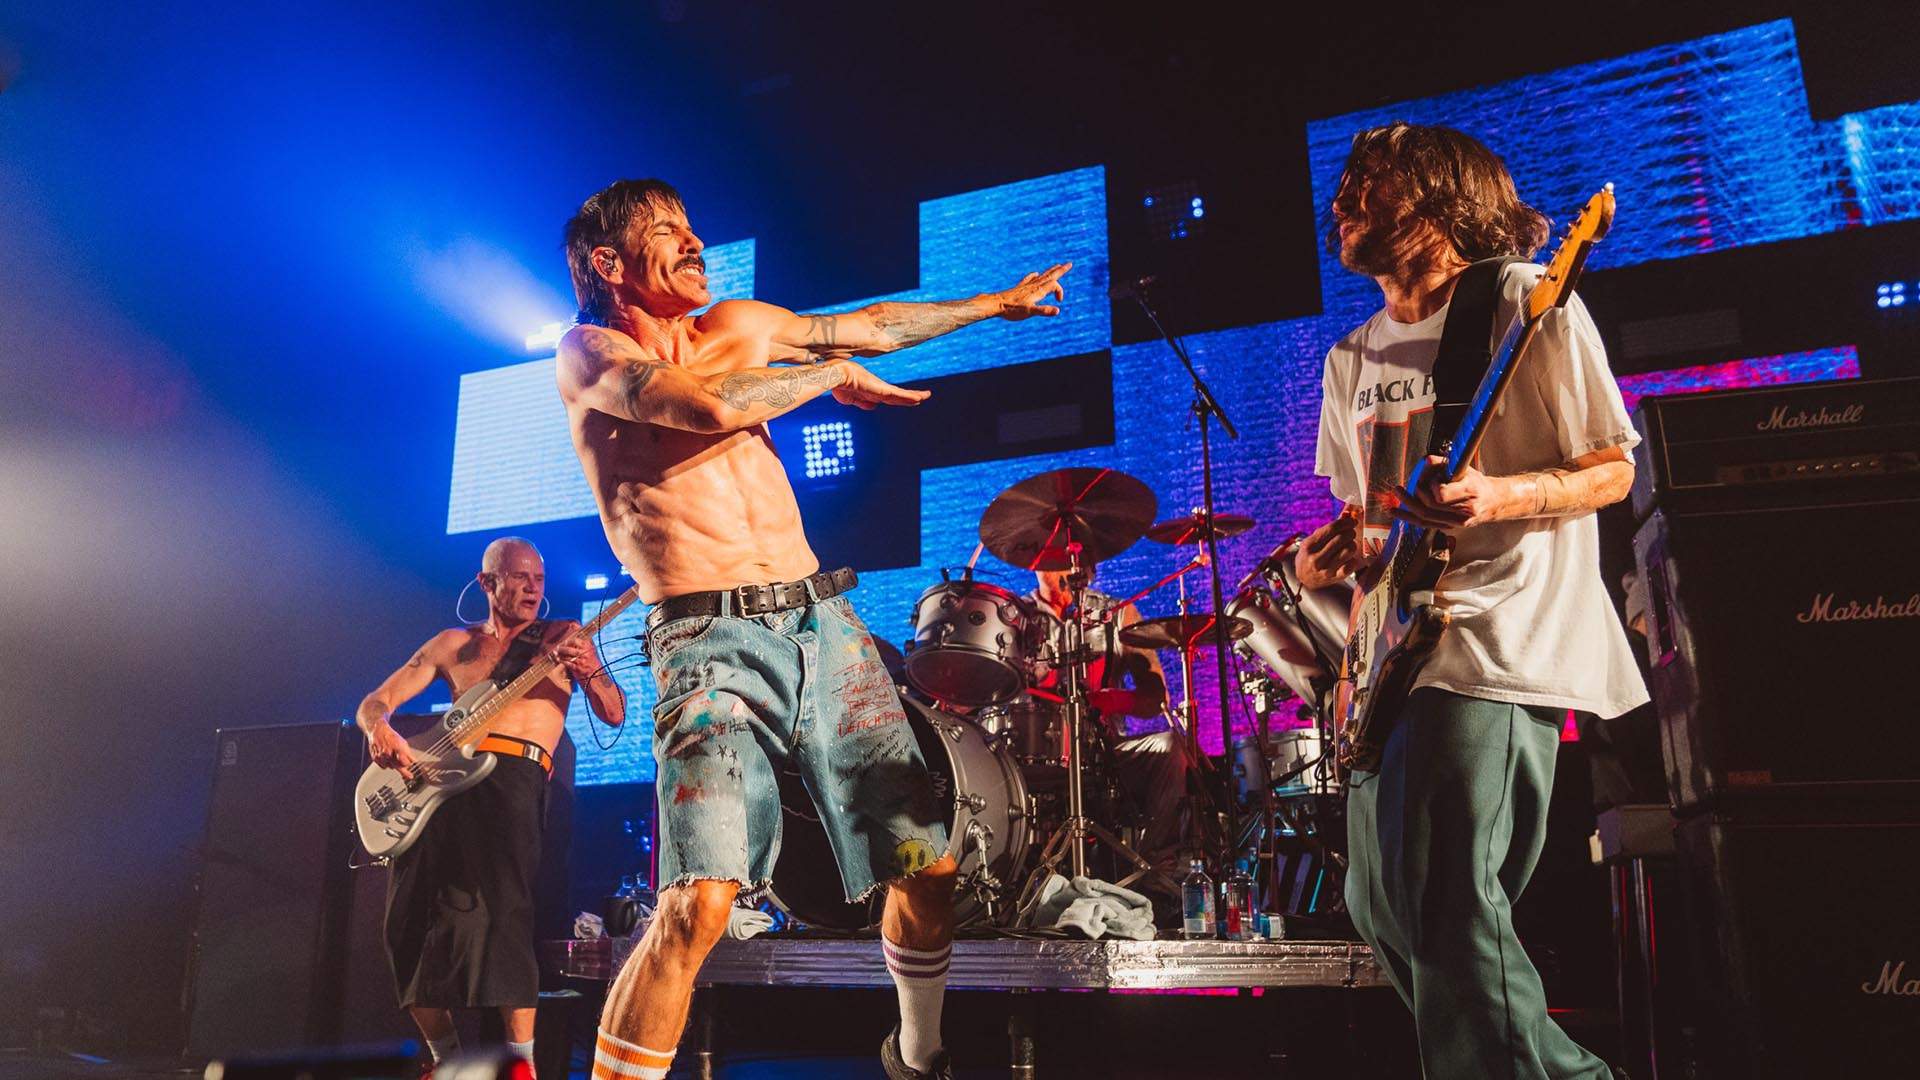 By the Way, Red Hot Chili Peppers Are Bringing Their Global Stadium Tour Down Under in 2023